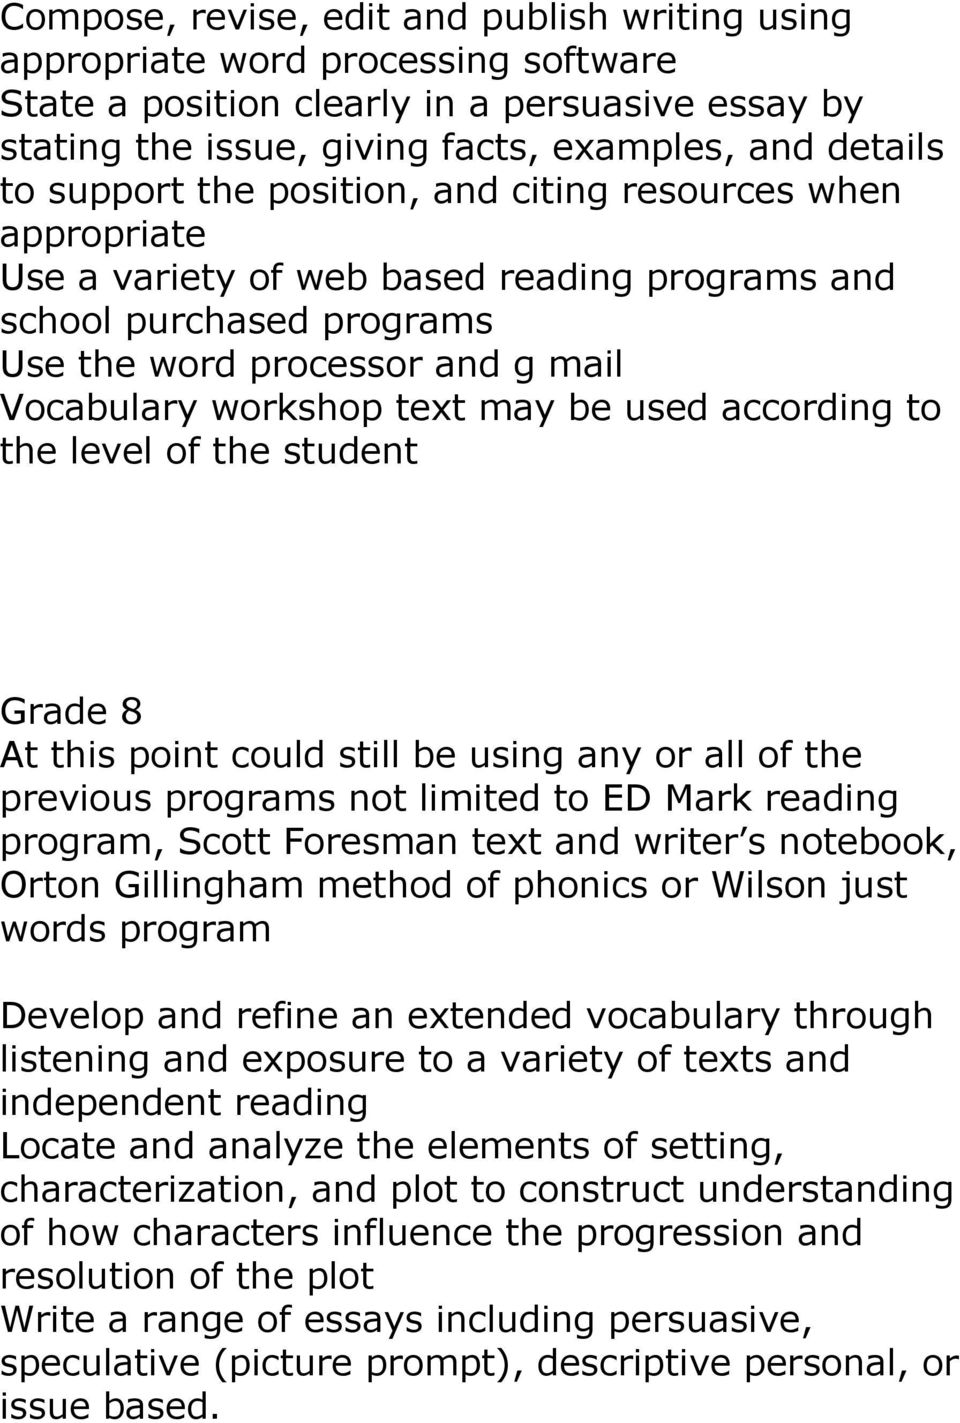 used according to the level of the student Grade 8 At this point could still be using any or all of the previous programs not limited to ED Mark reading program, Scott Foresman text and writer s